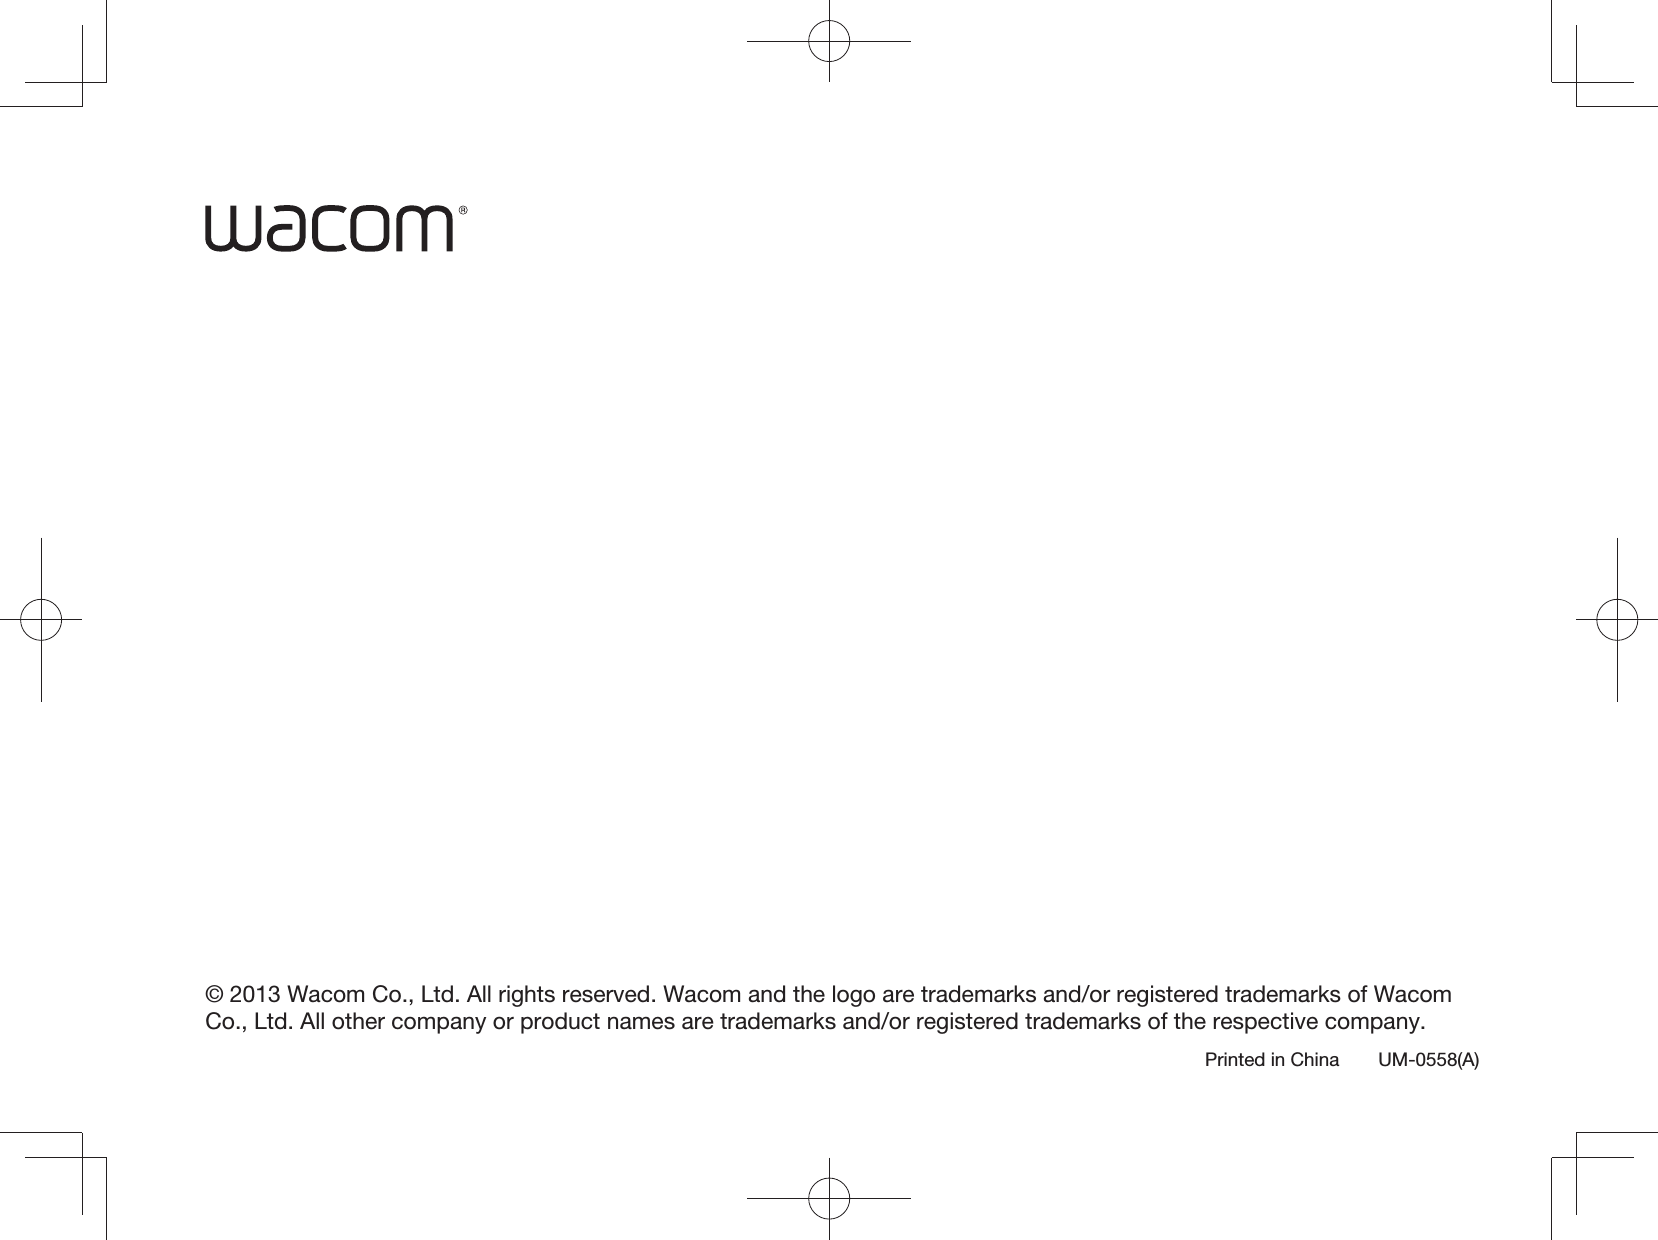 Printed in China UM-0558(A)© 2013 Wacom Co., Ltd. All rights reserved. Wacom and the logo are trademarks and/or registered trademarks of Wacom Co., Ltd. All other company or product names are trademarks and/or registered trademarks of the respective company.